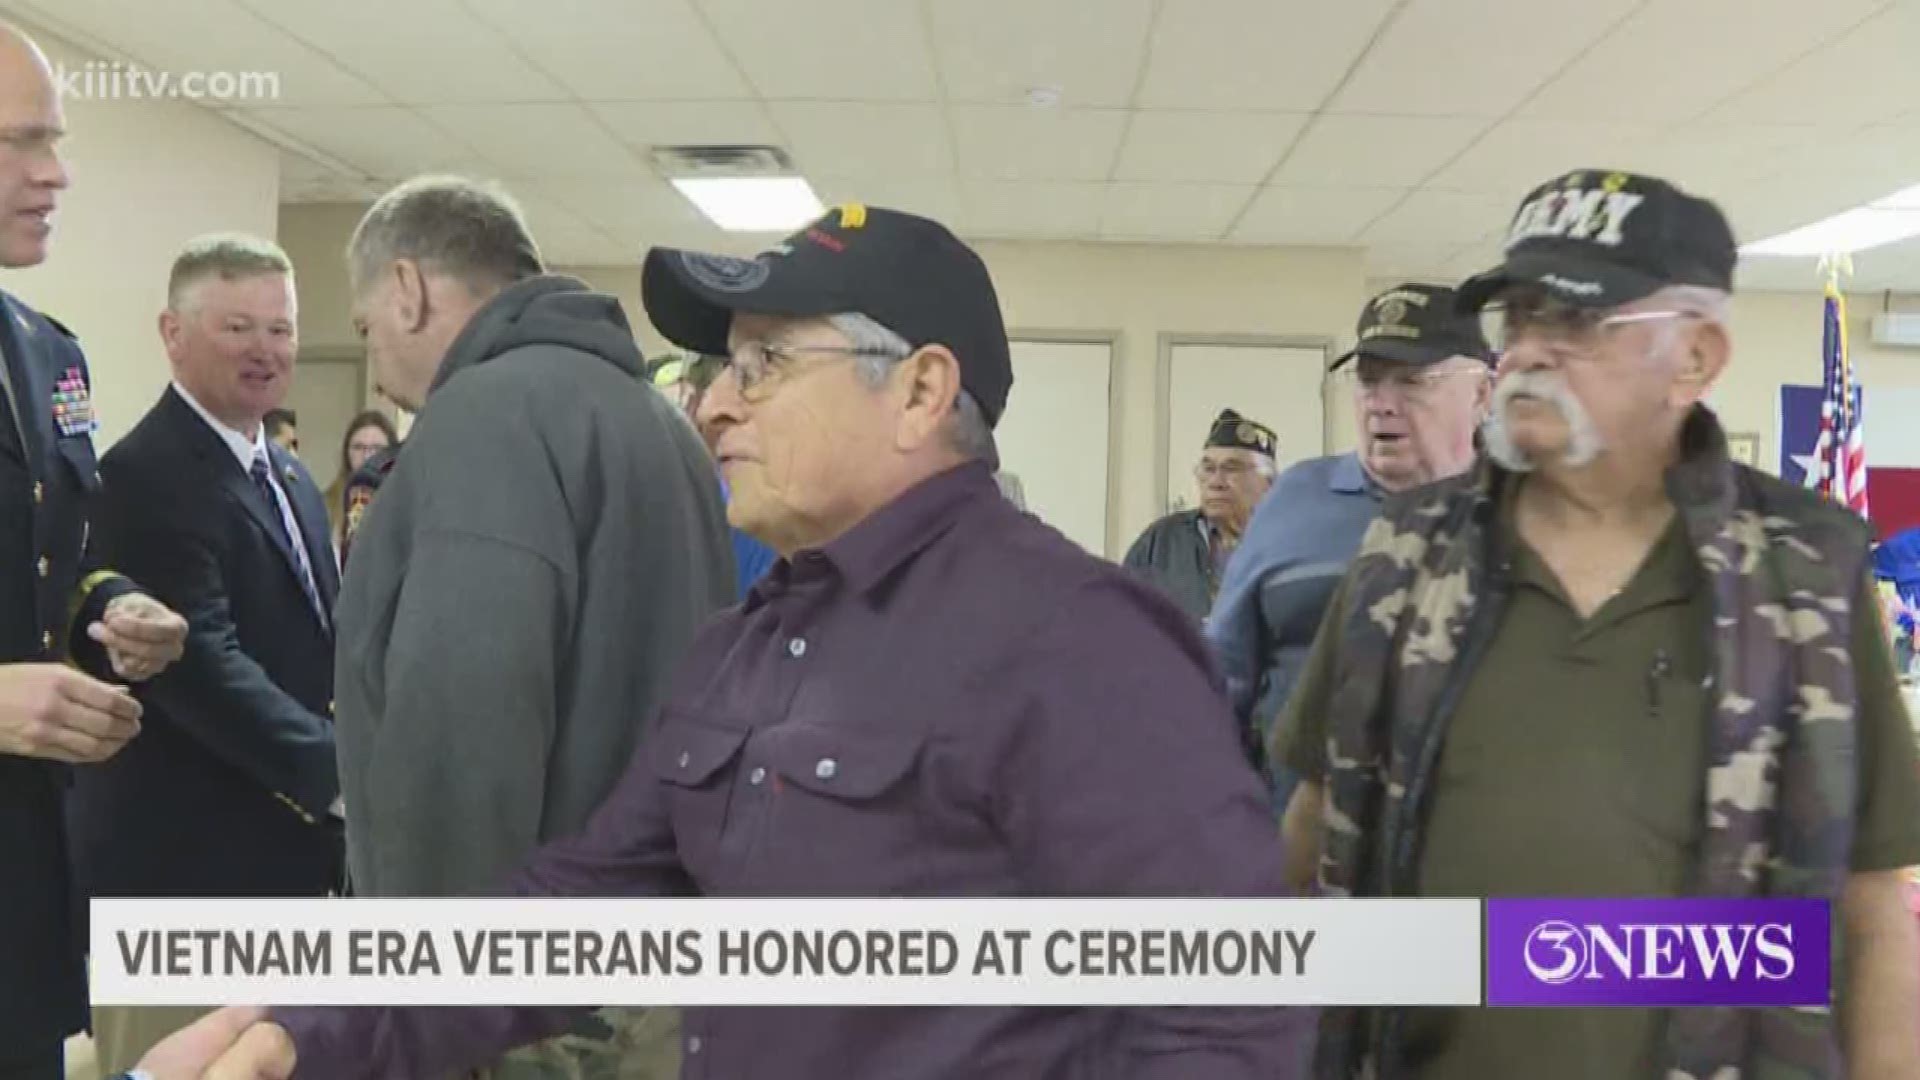 One Vietnam Veteran after another walked over to receive a special pin for their service to our country on Monday in Alice and Kingsville.